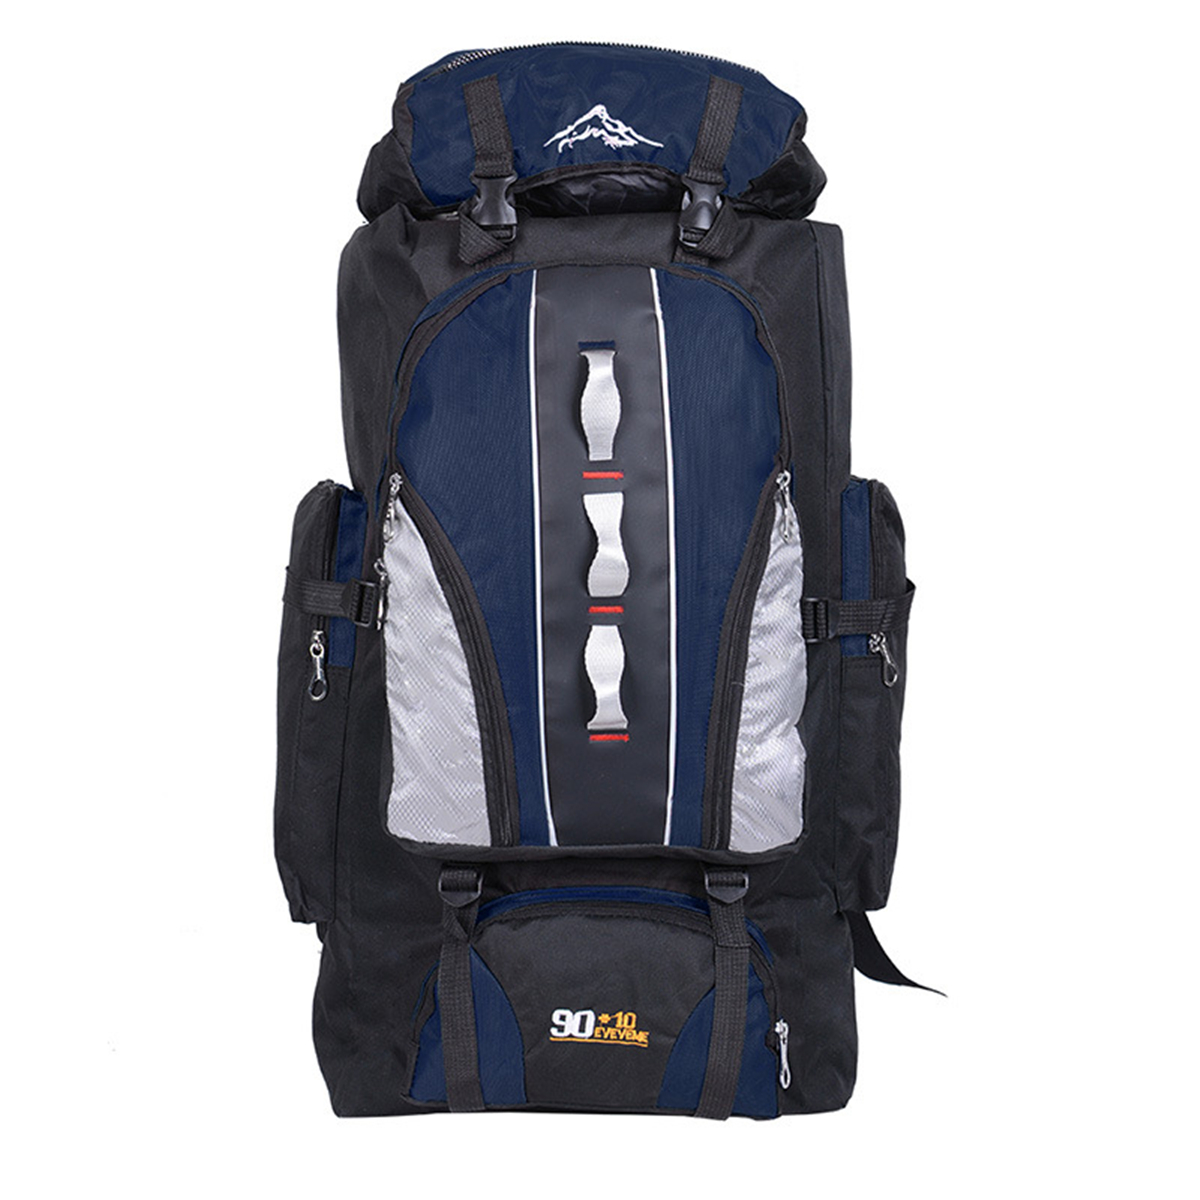 100L Outdoor Hiking Camping Backpack Bag Travel Mountaineering Trekking Day Pack - Auto GoShop